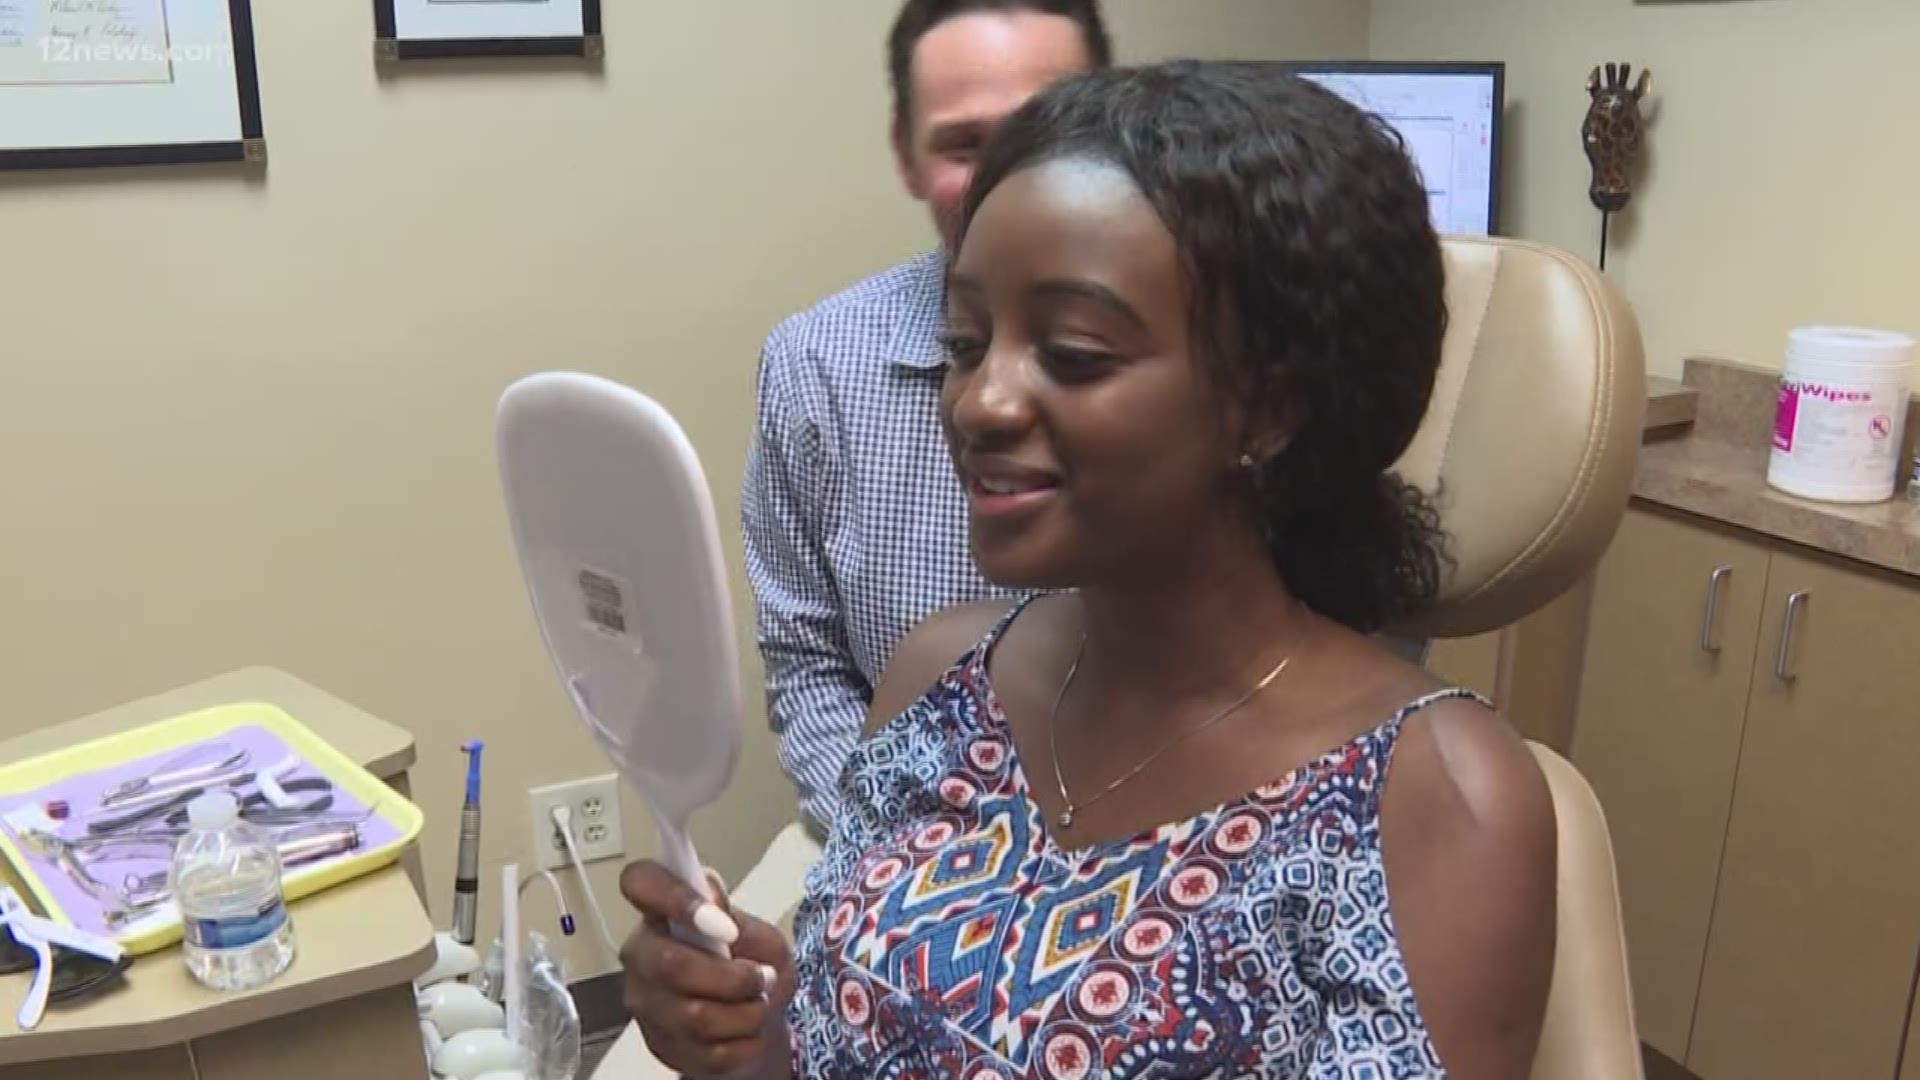 17-year-old Tamyka has sickle cell anemia which requires a lot of doctor appointments and hospital visits. It also may have impacted the development of her teeth causing them to be severely crooked. She was granted a Make A Wish and she wished for a better smile.